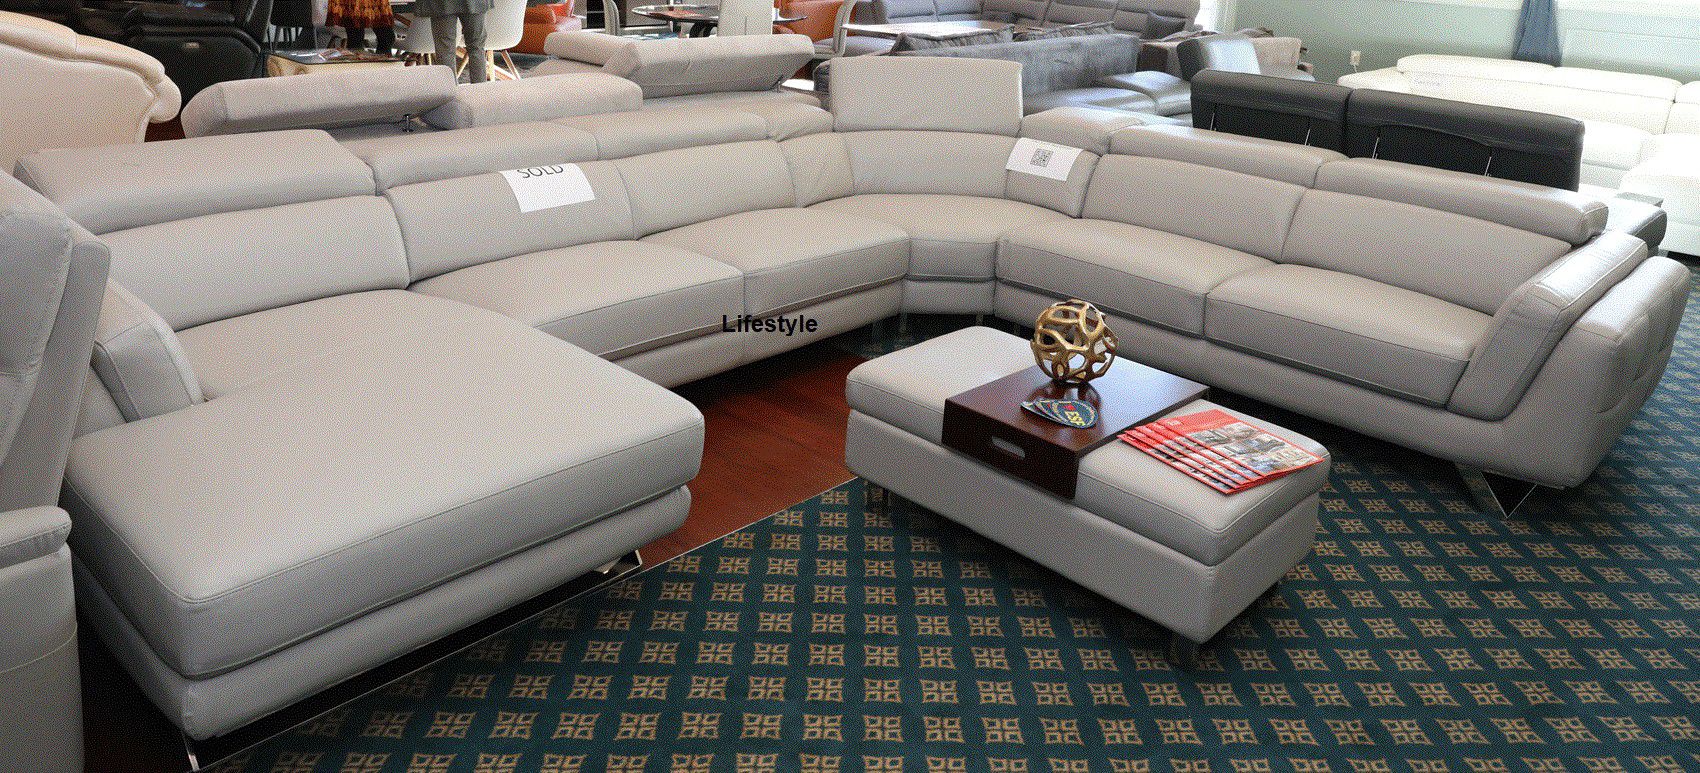 Made İn Italy,  FULL LEATHER Sectional,  Fast Delivery,  Finance Available 